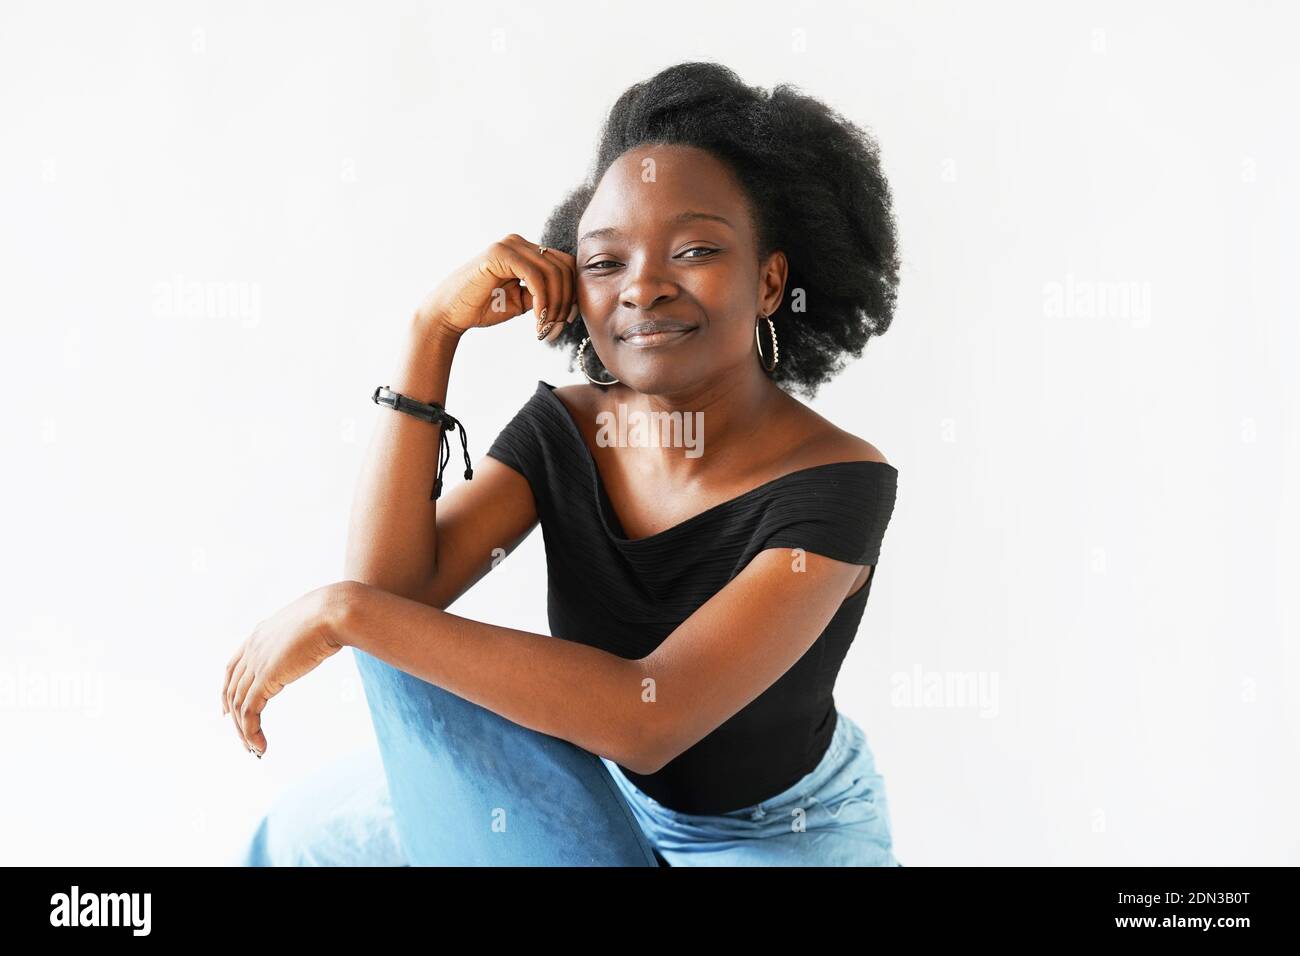 Portrait of a cheerful Afroamerican young woman sitting and looking at the camera on white background Stock Photo